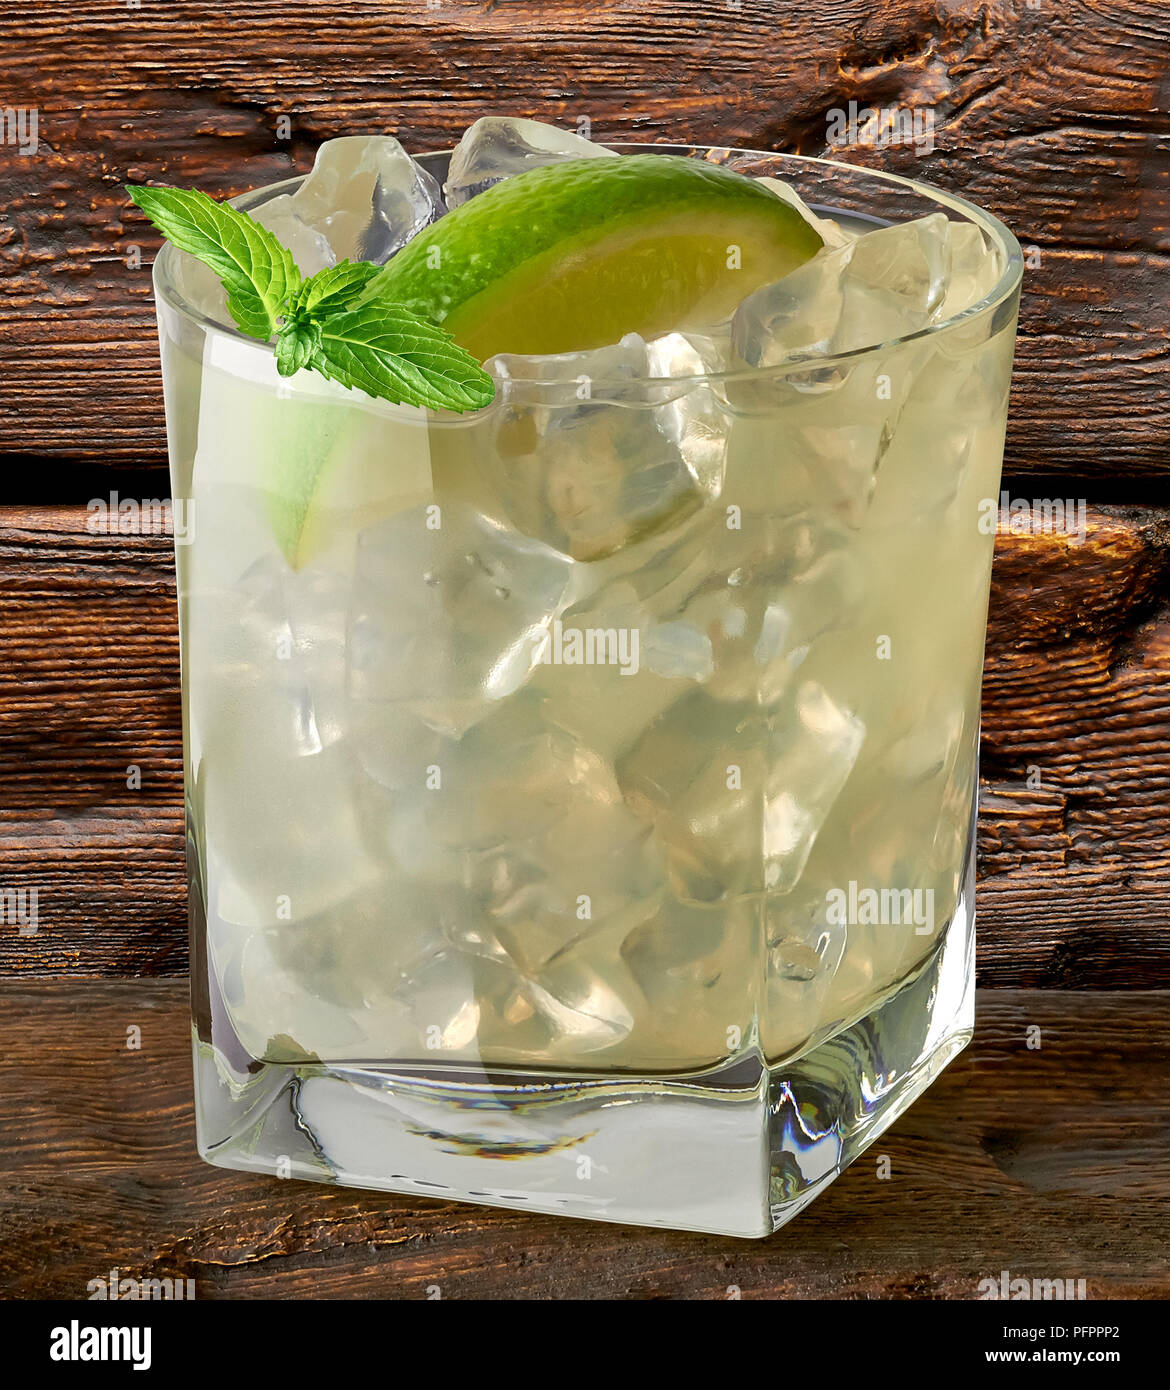 Vodka lime, gimlet, caipirinha or gin tonic with ice in glass on wooden background Stock Photo